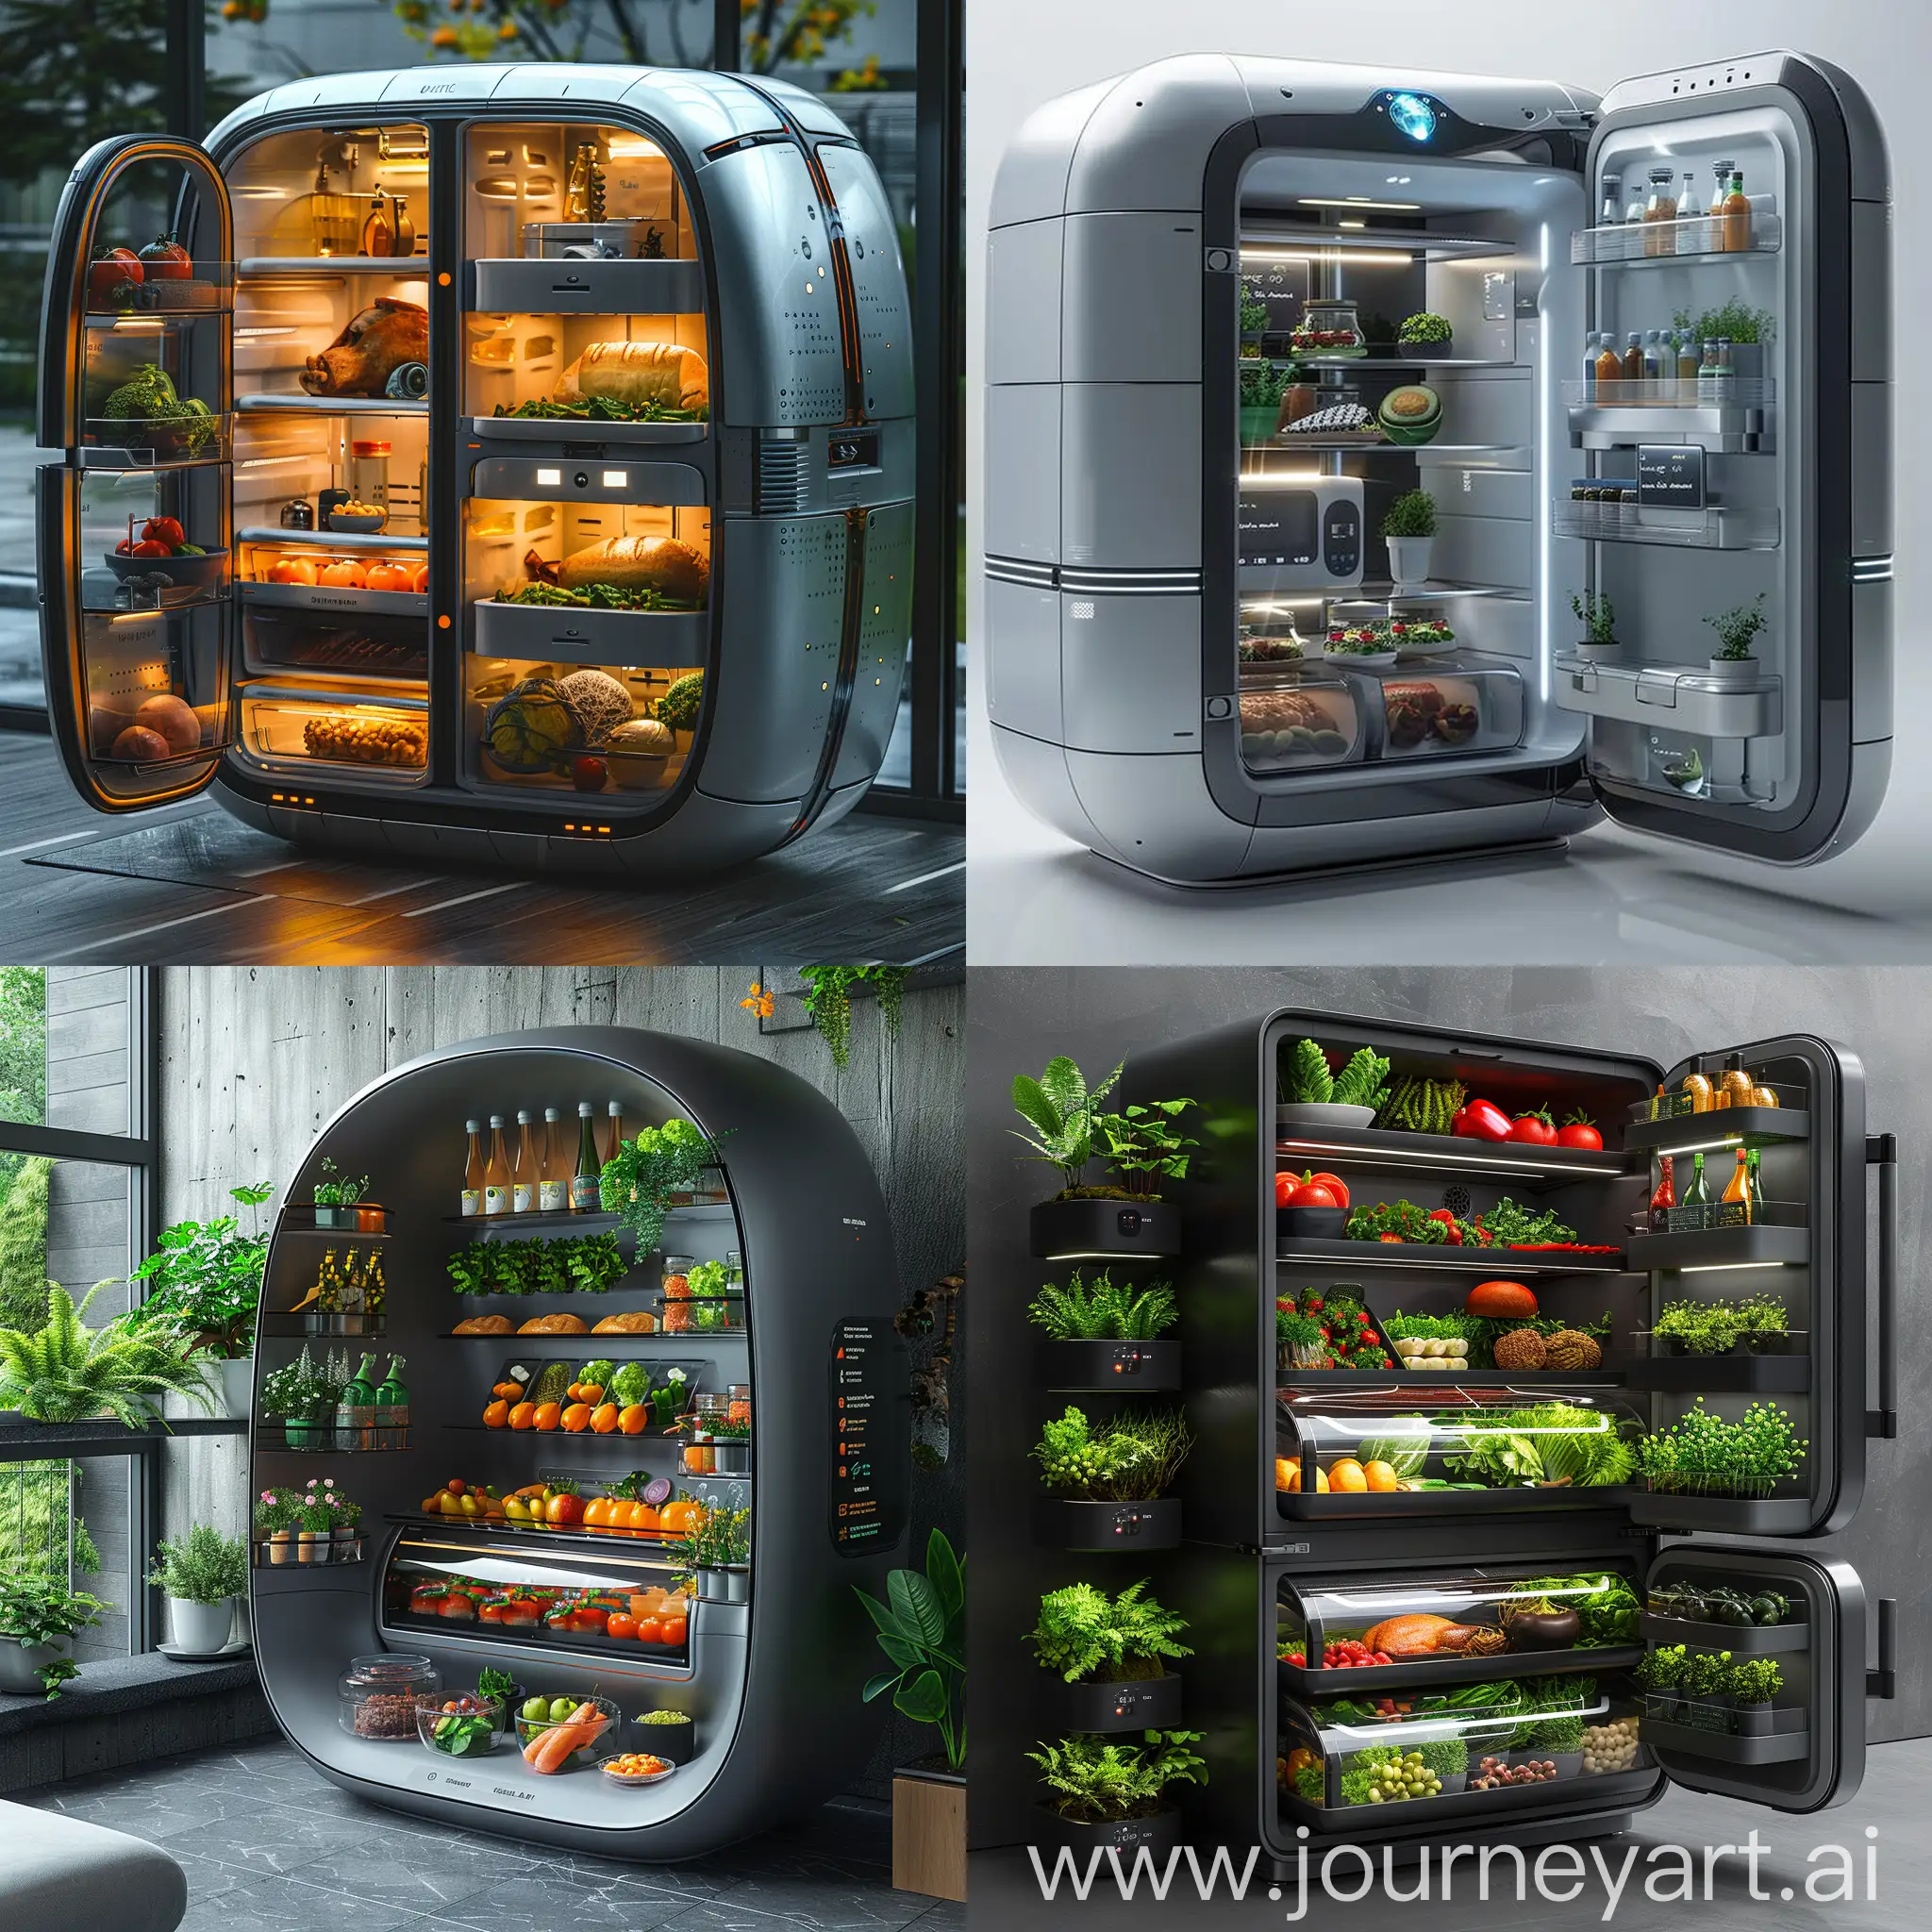 Futuristic-Smart-Fridge-with-Interactive-Touchscreen-Display-and-Voice-Control